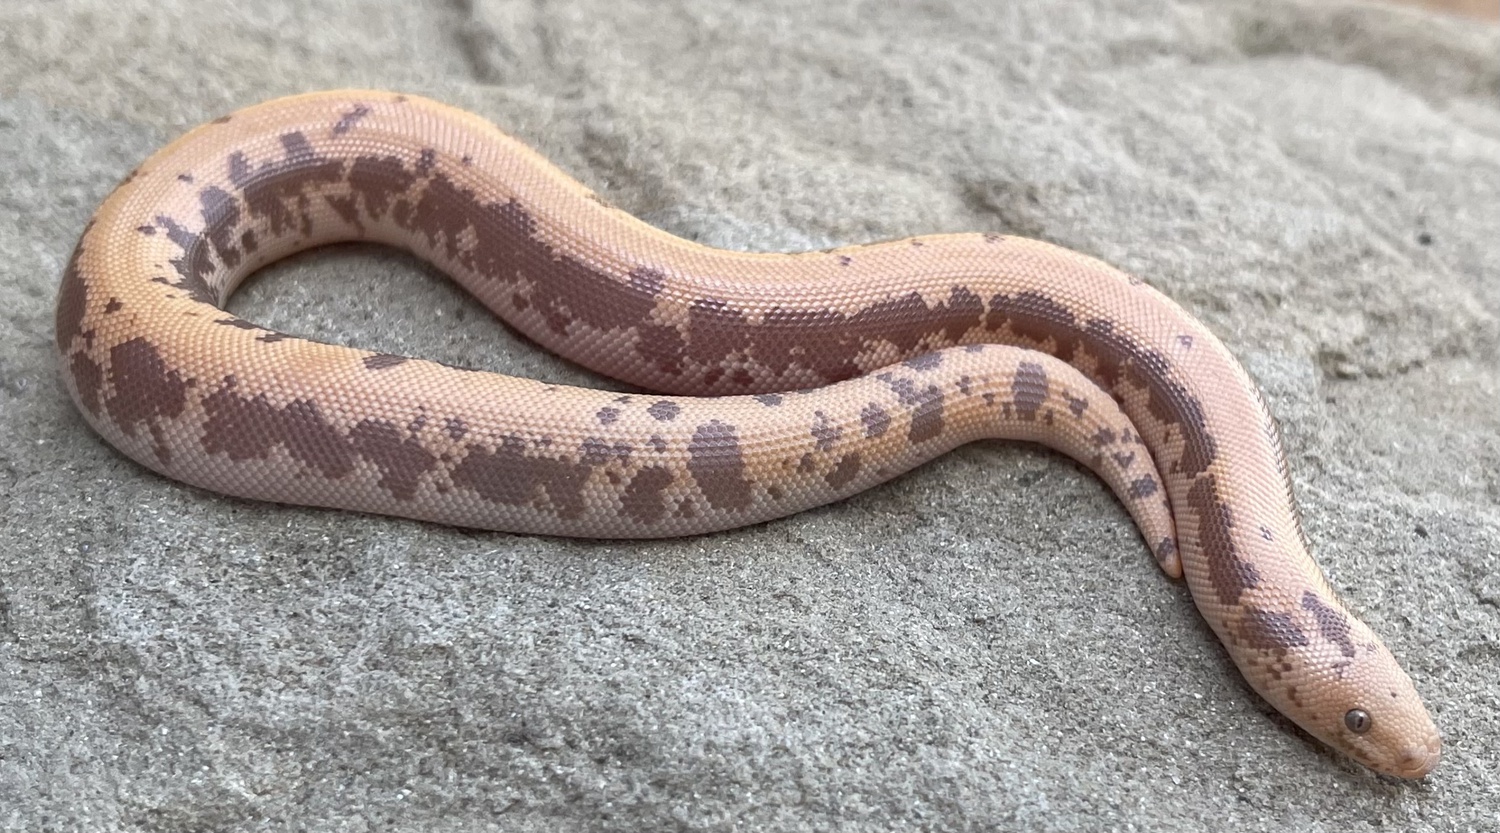 Albino Paint Het Anery Sand Boa by Big Squeeze Constrictors, LLC